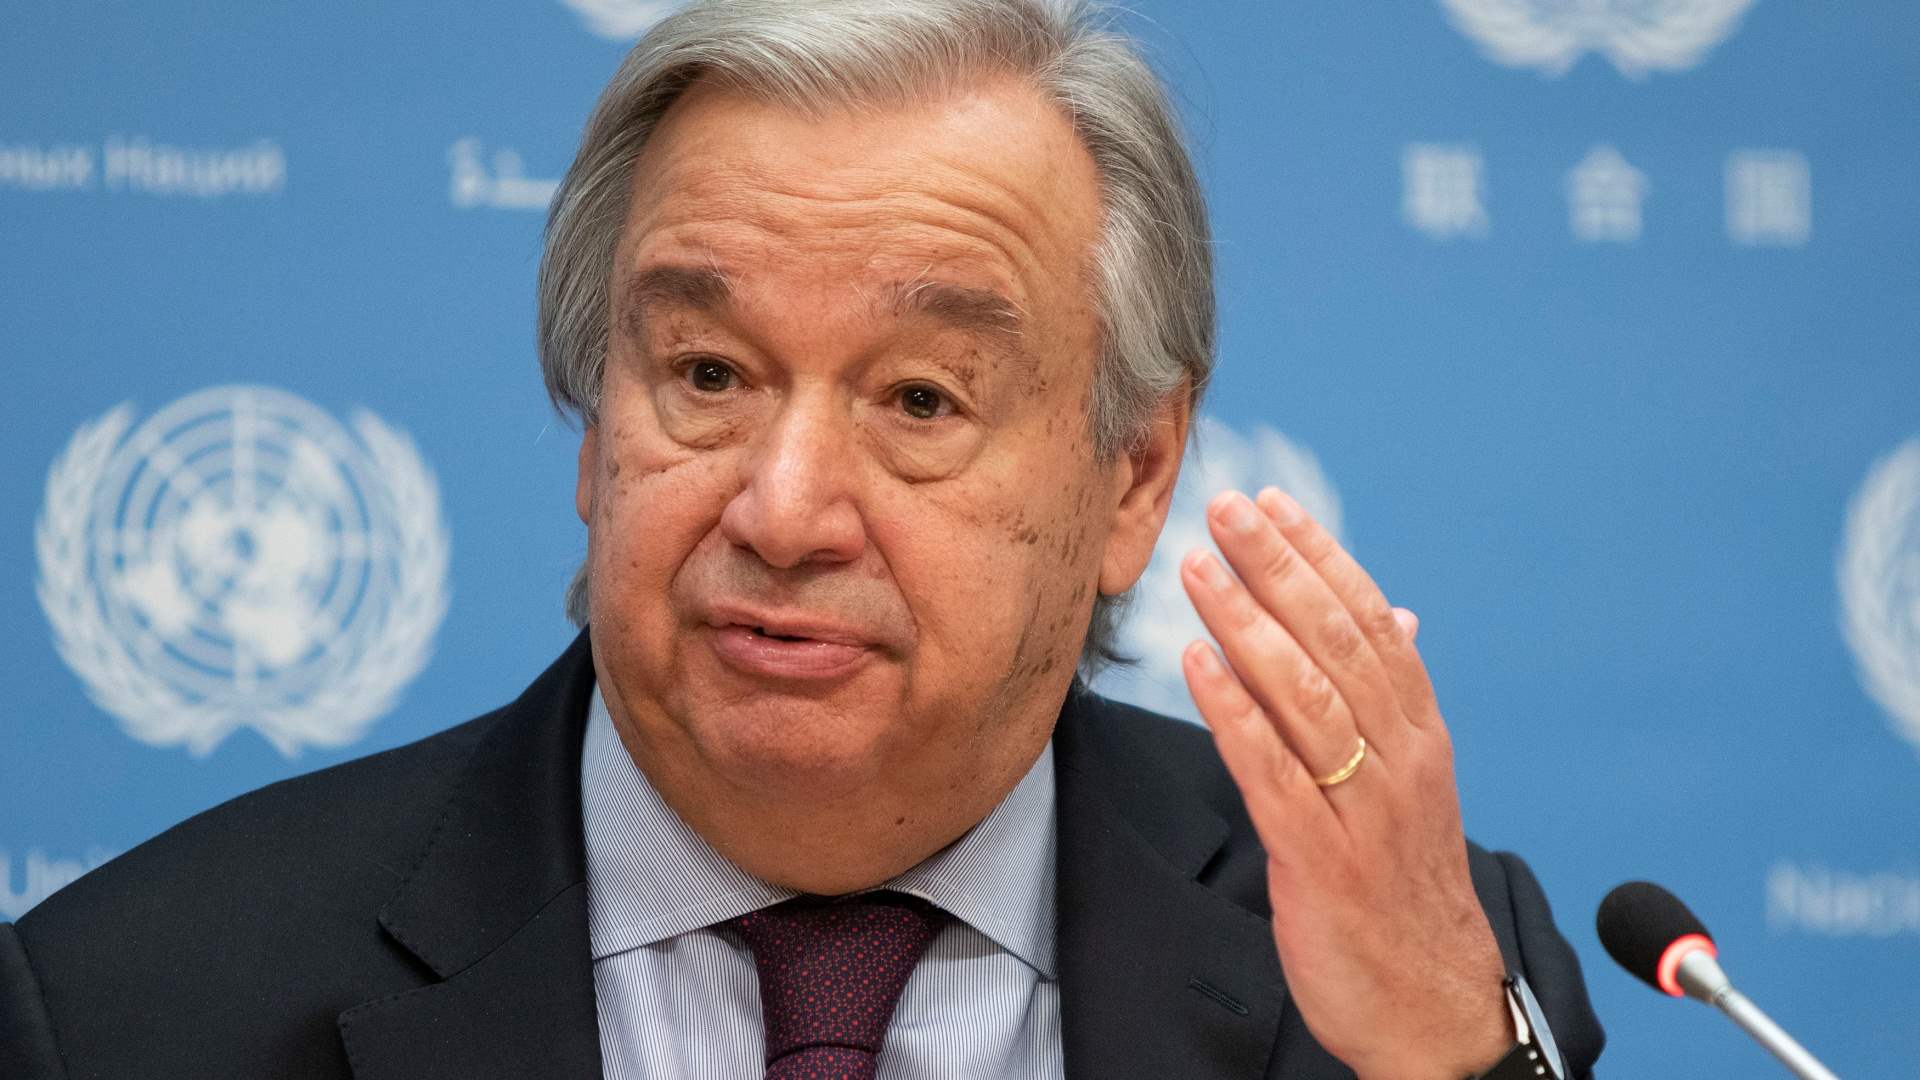 Guterres: The Climate Crisis Has Opened the Gates of Hell